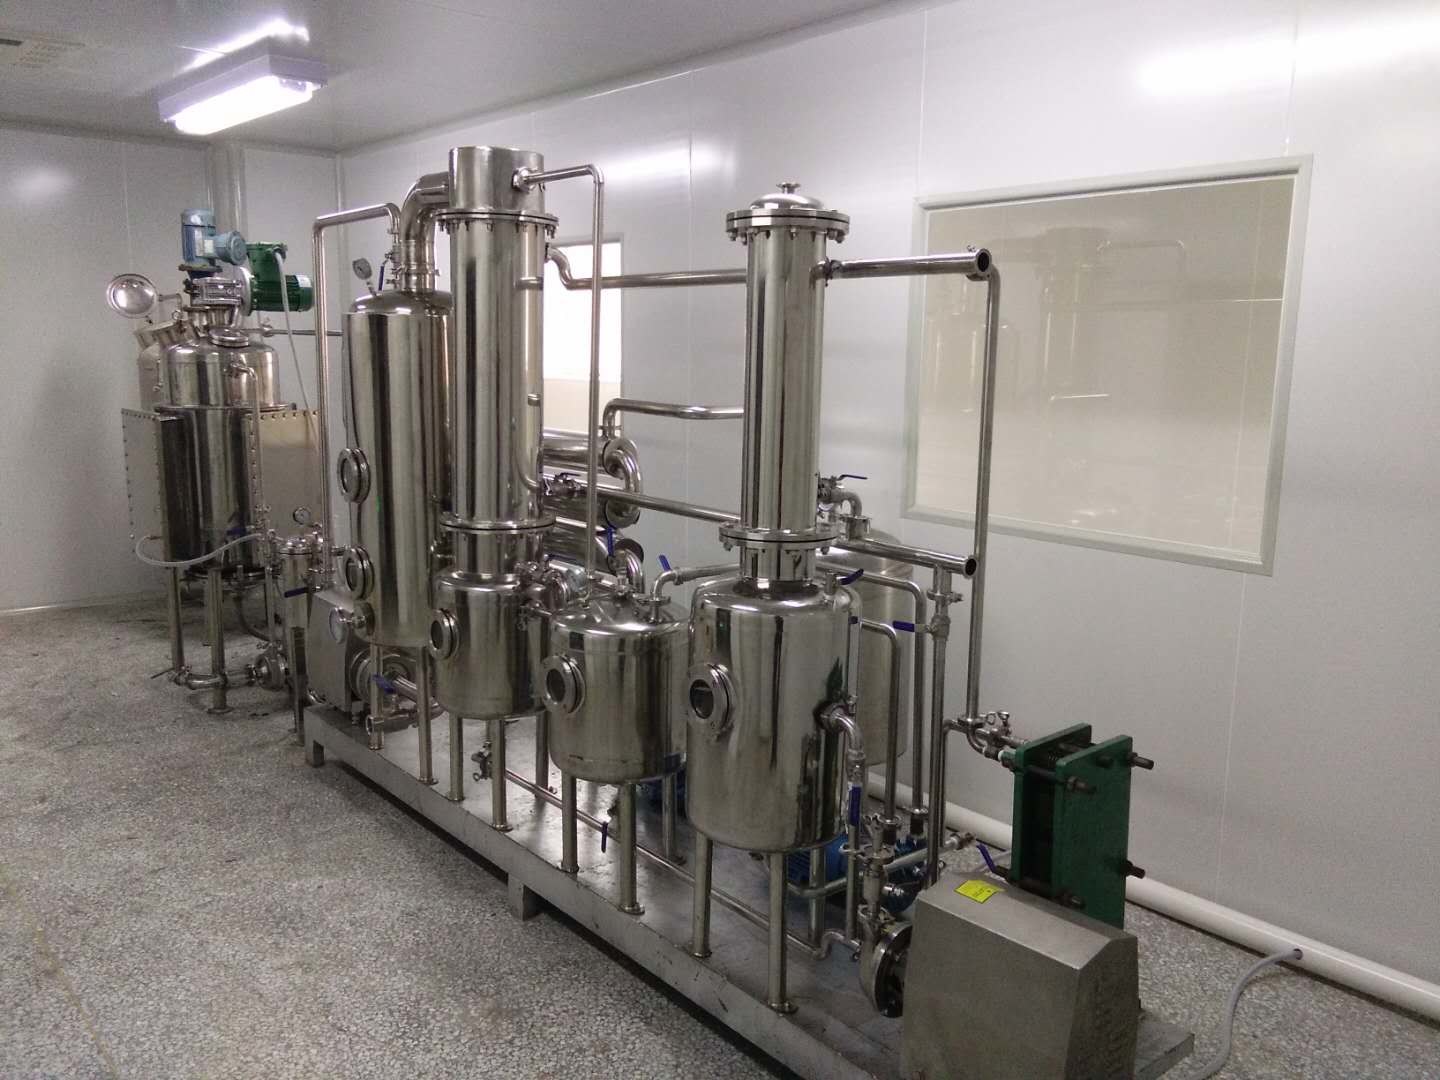 100L Ethanol Extractor Equipment for hemp CBD oil or Pharmaceuticals and chemicals